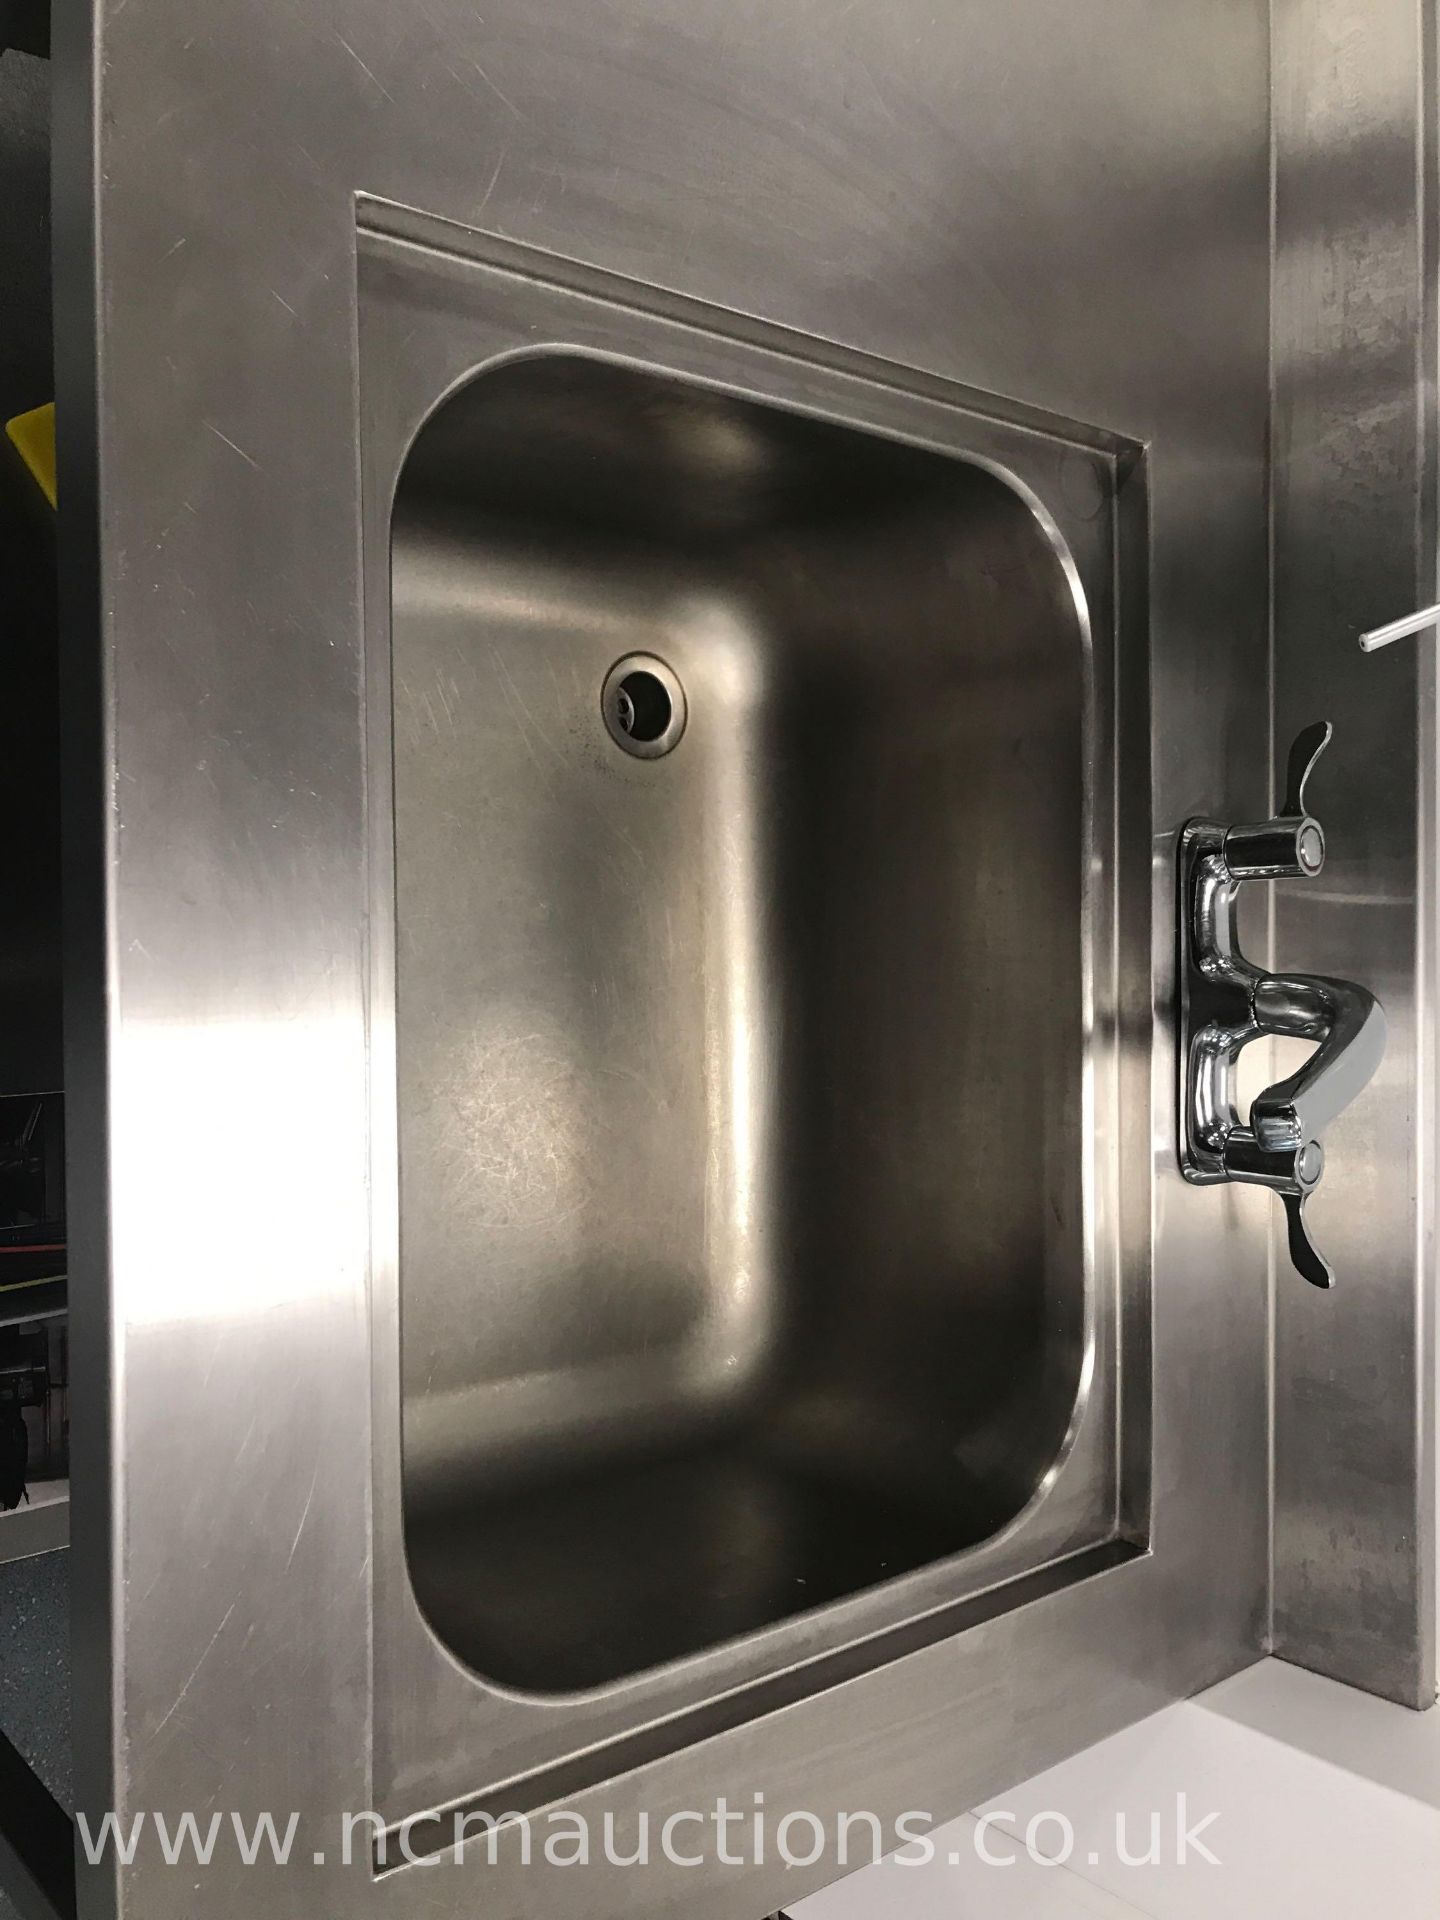 Stainless Steel Counter Catering - Image 4 of 5